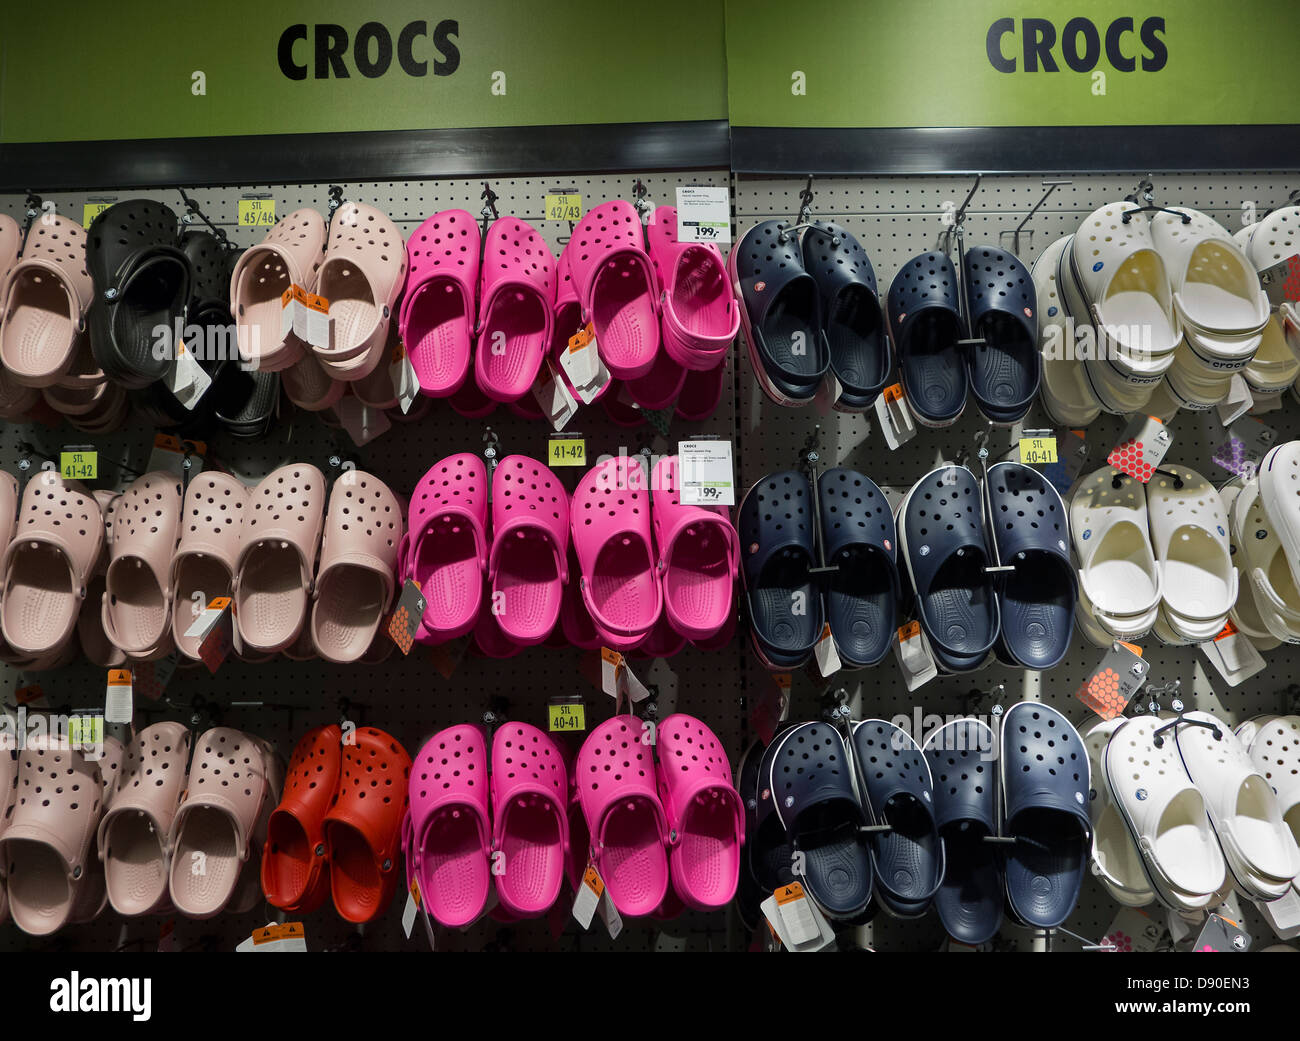 shoe stores that sell crocs